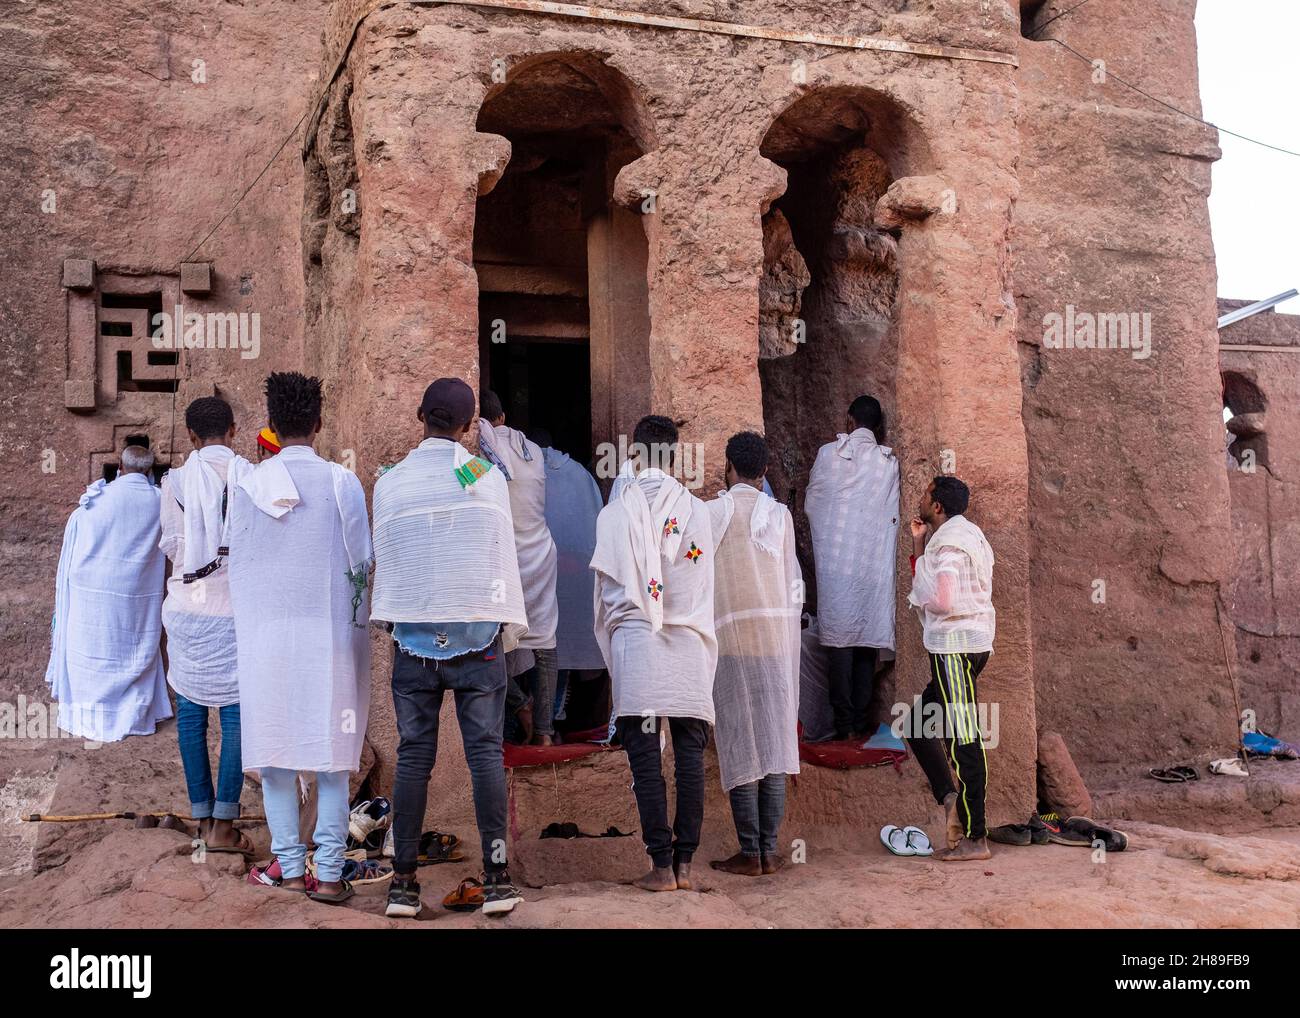 Lalibela, Ethiopia - May 23, 2021: Parishioners attending a mass from outside a church and wearing white clothing over their usual cloths Stock Photo